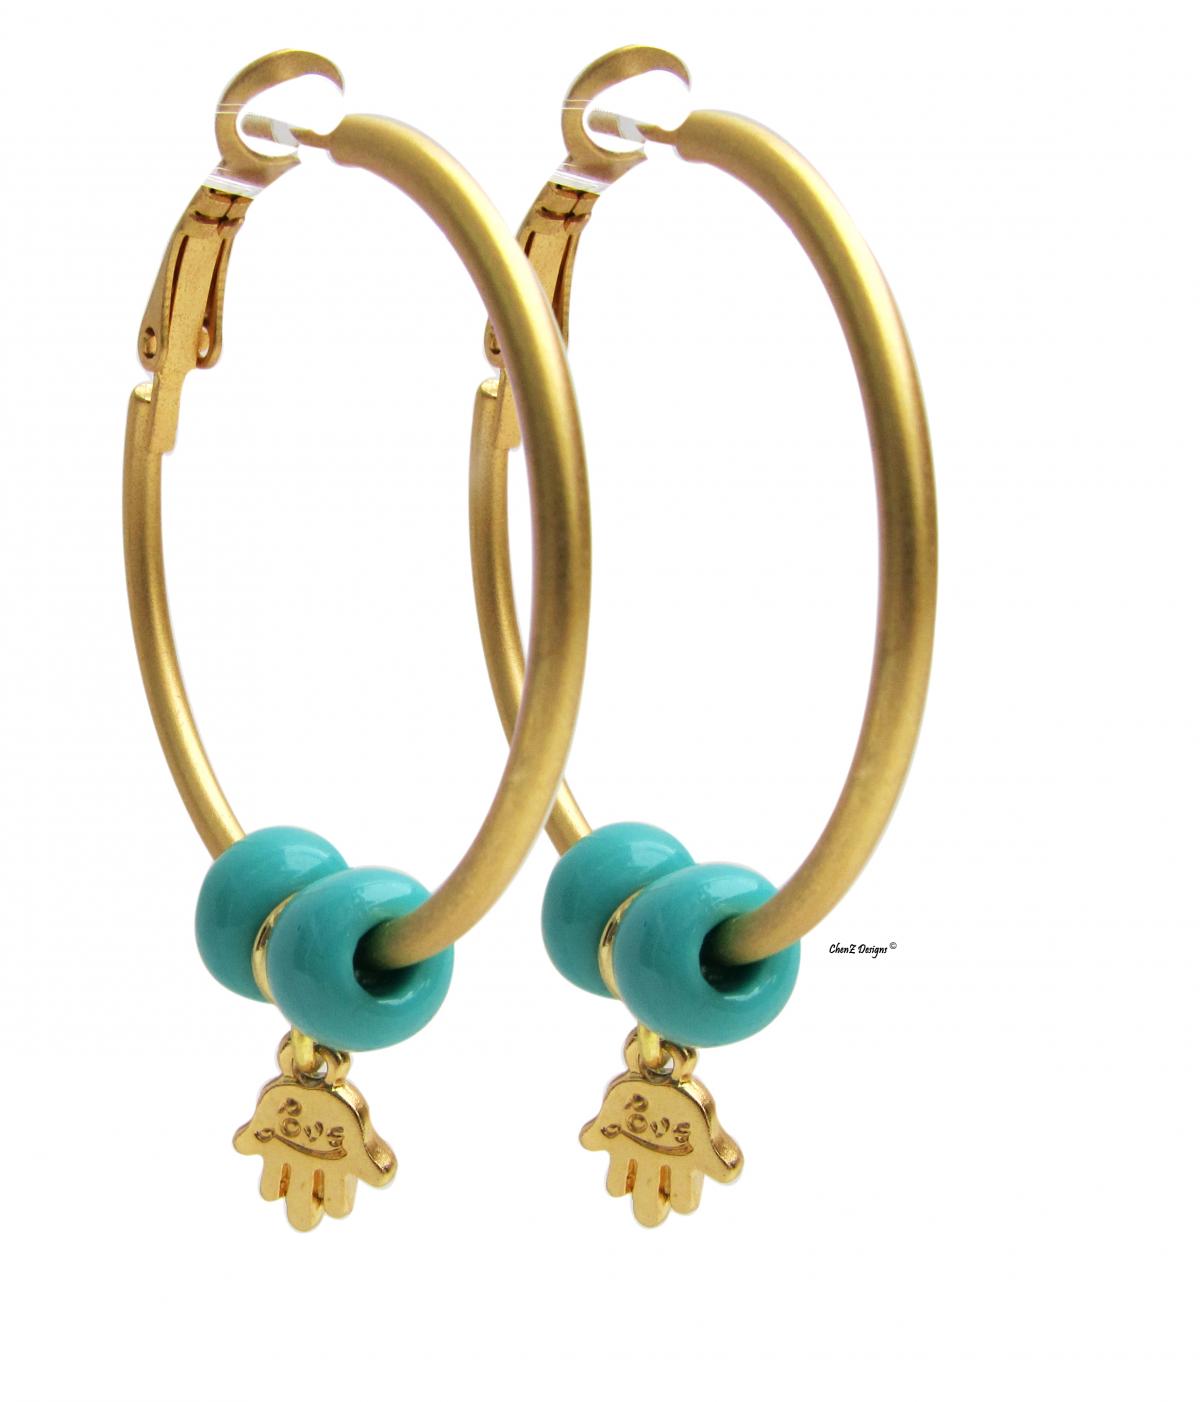 Gold Hoop Earrings With Hamsa And Turquoise Beads